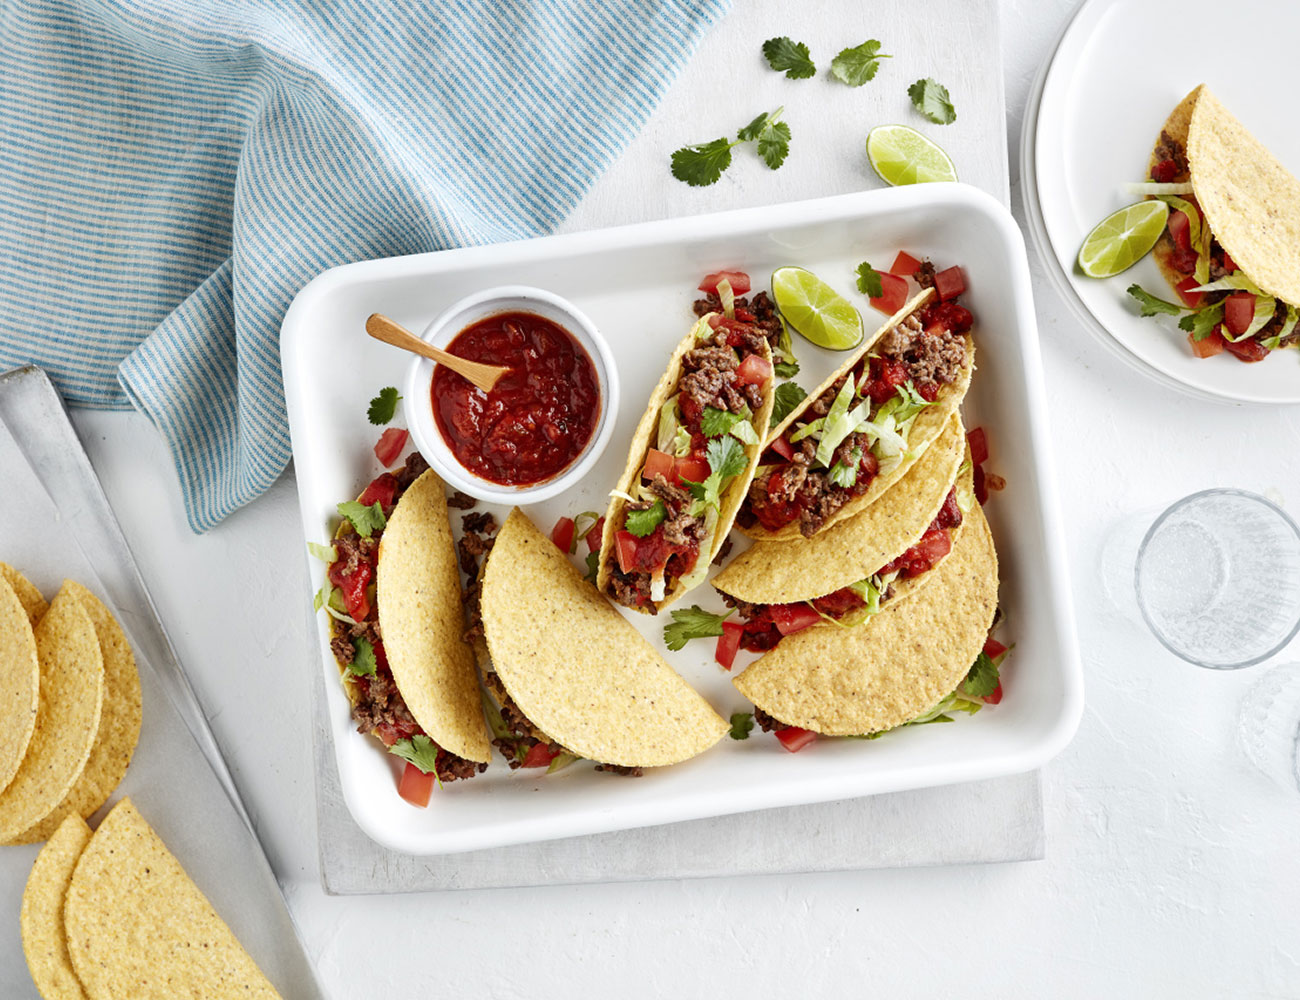 What's For Dinner - Mexican Tacos